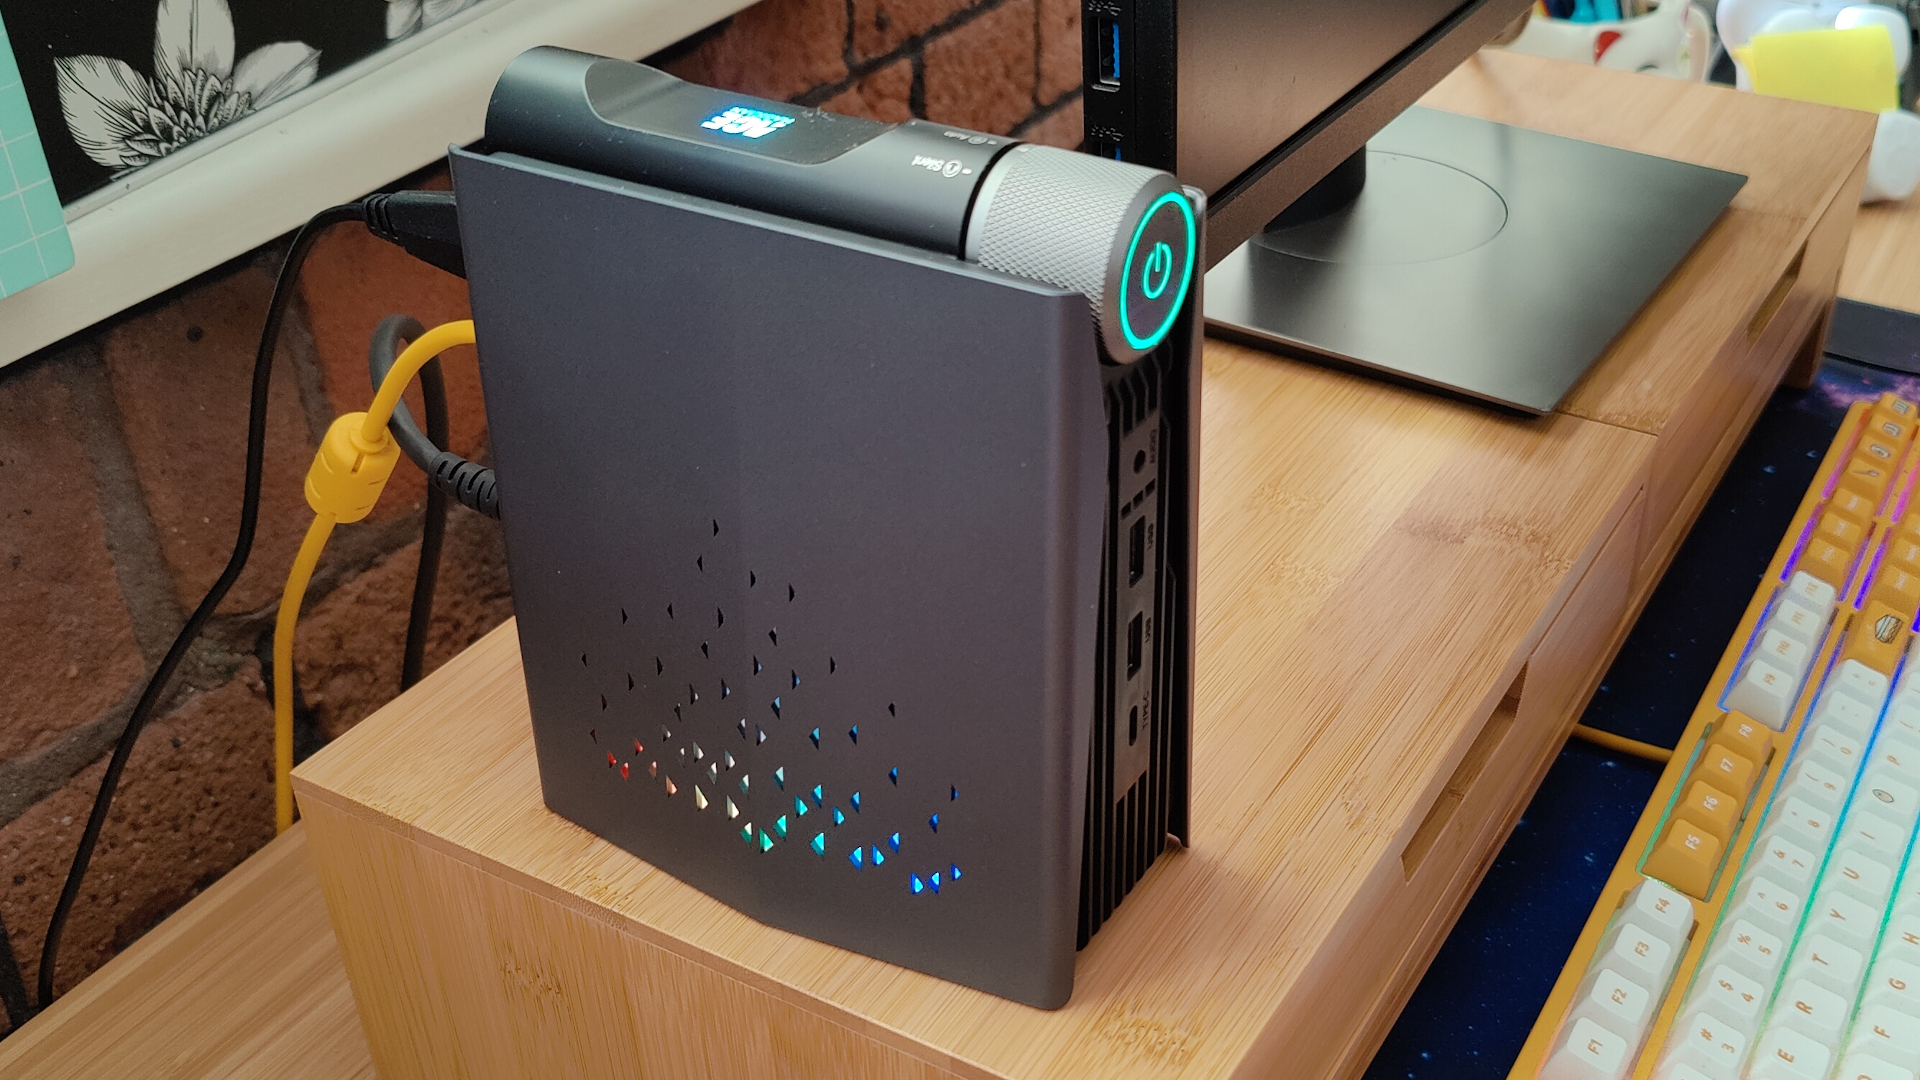 AceMagician AMR5 Mini PC review: An affordable and compact option for students